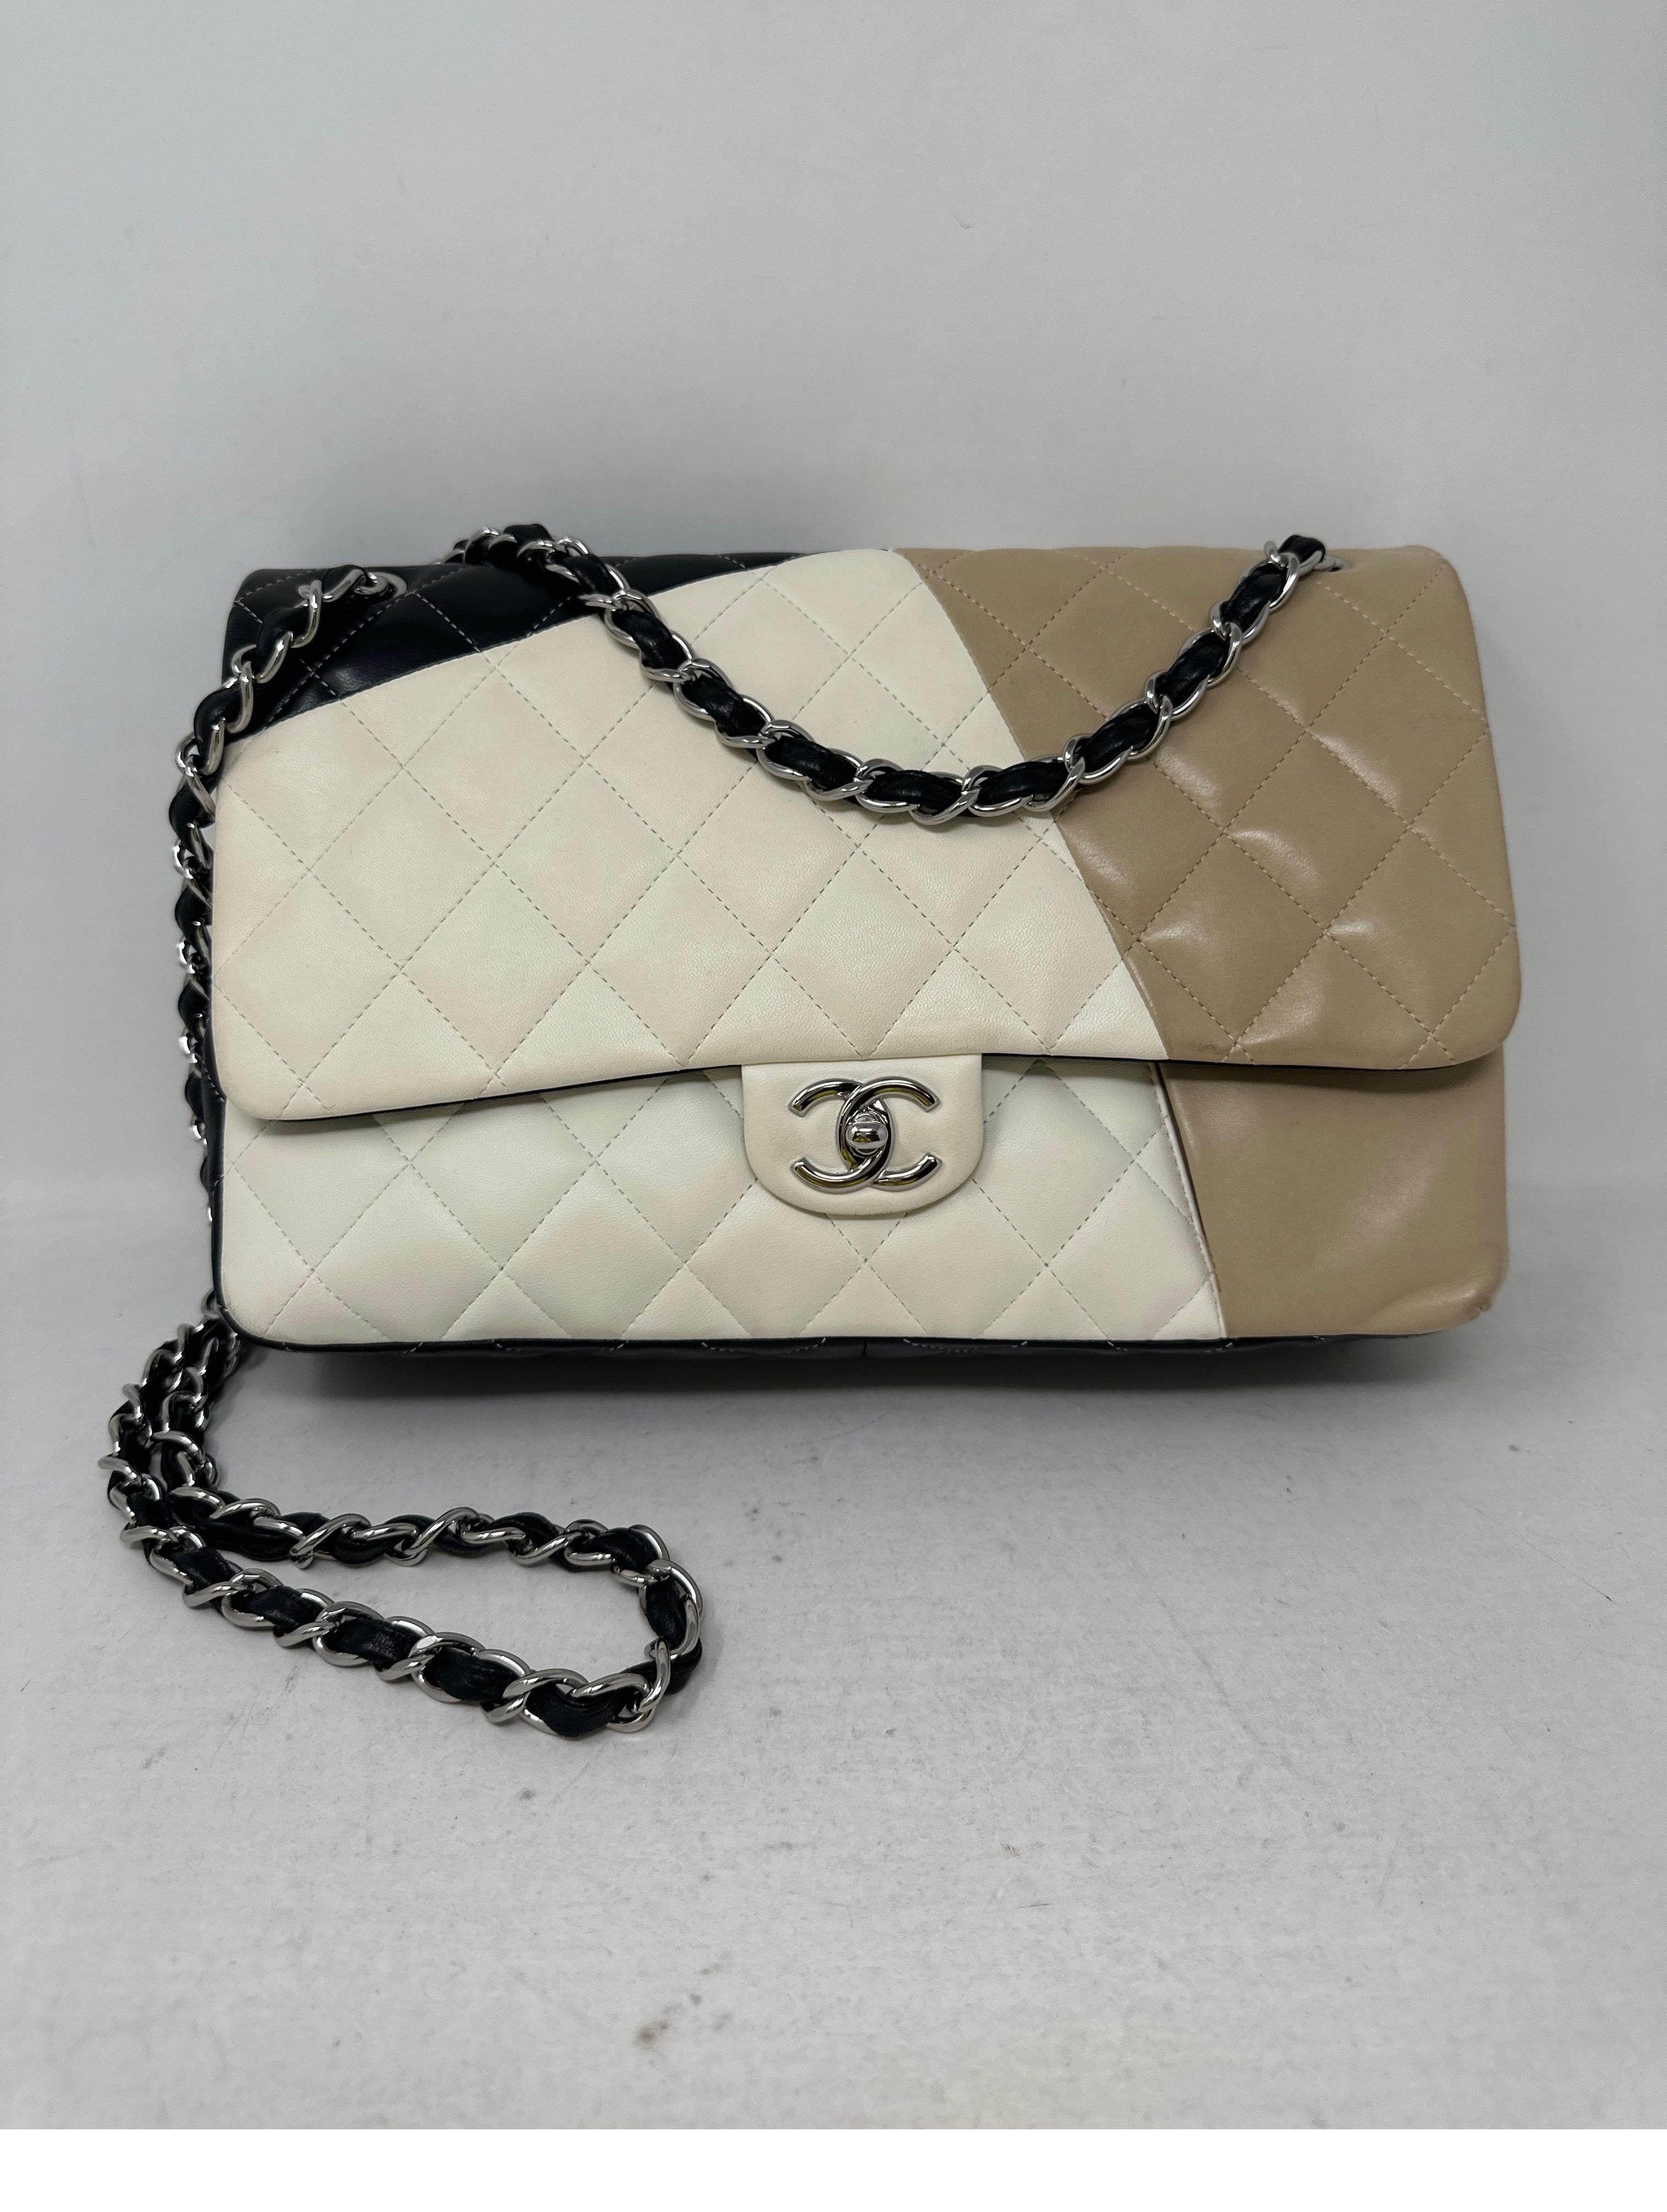 Chanel Multi-Color Jumbo Bag. Cream, black, tan with black leather chain strap. Most wanted size jumbo. Can be worn crossbody or doubled as a shoulder bag. Interior clean. Nice condition. Guaranteed authentic. 